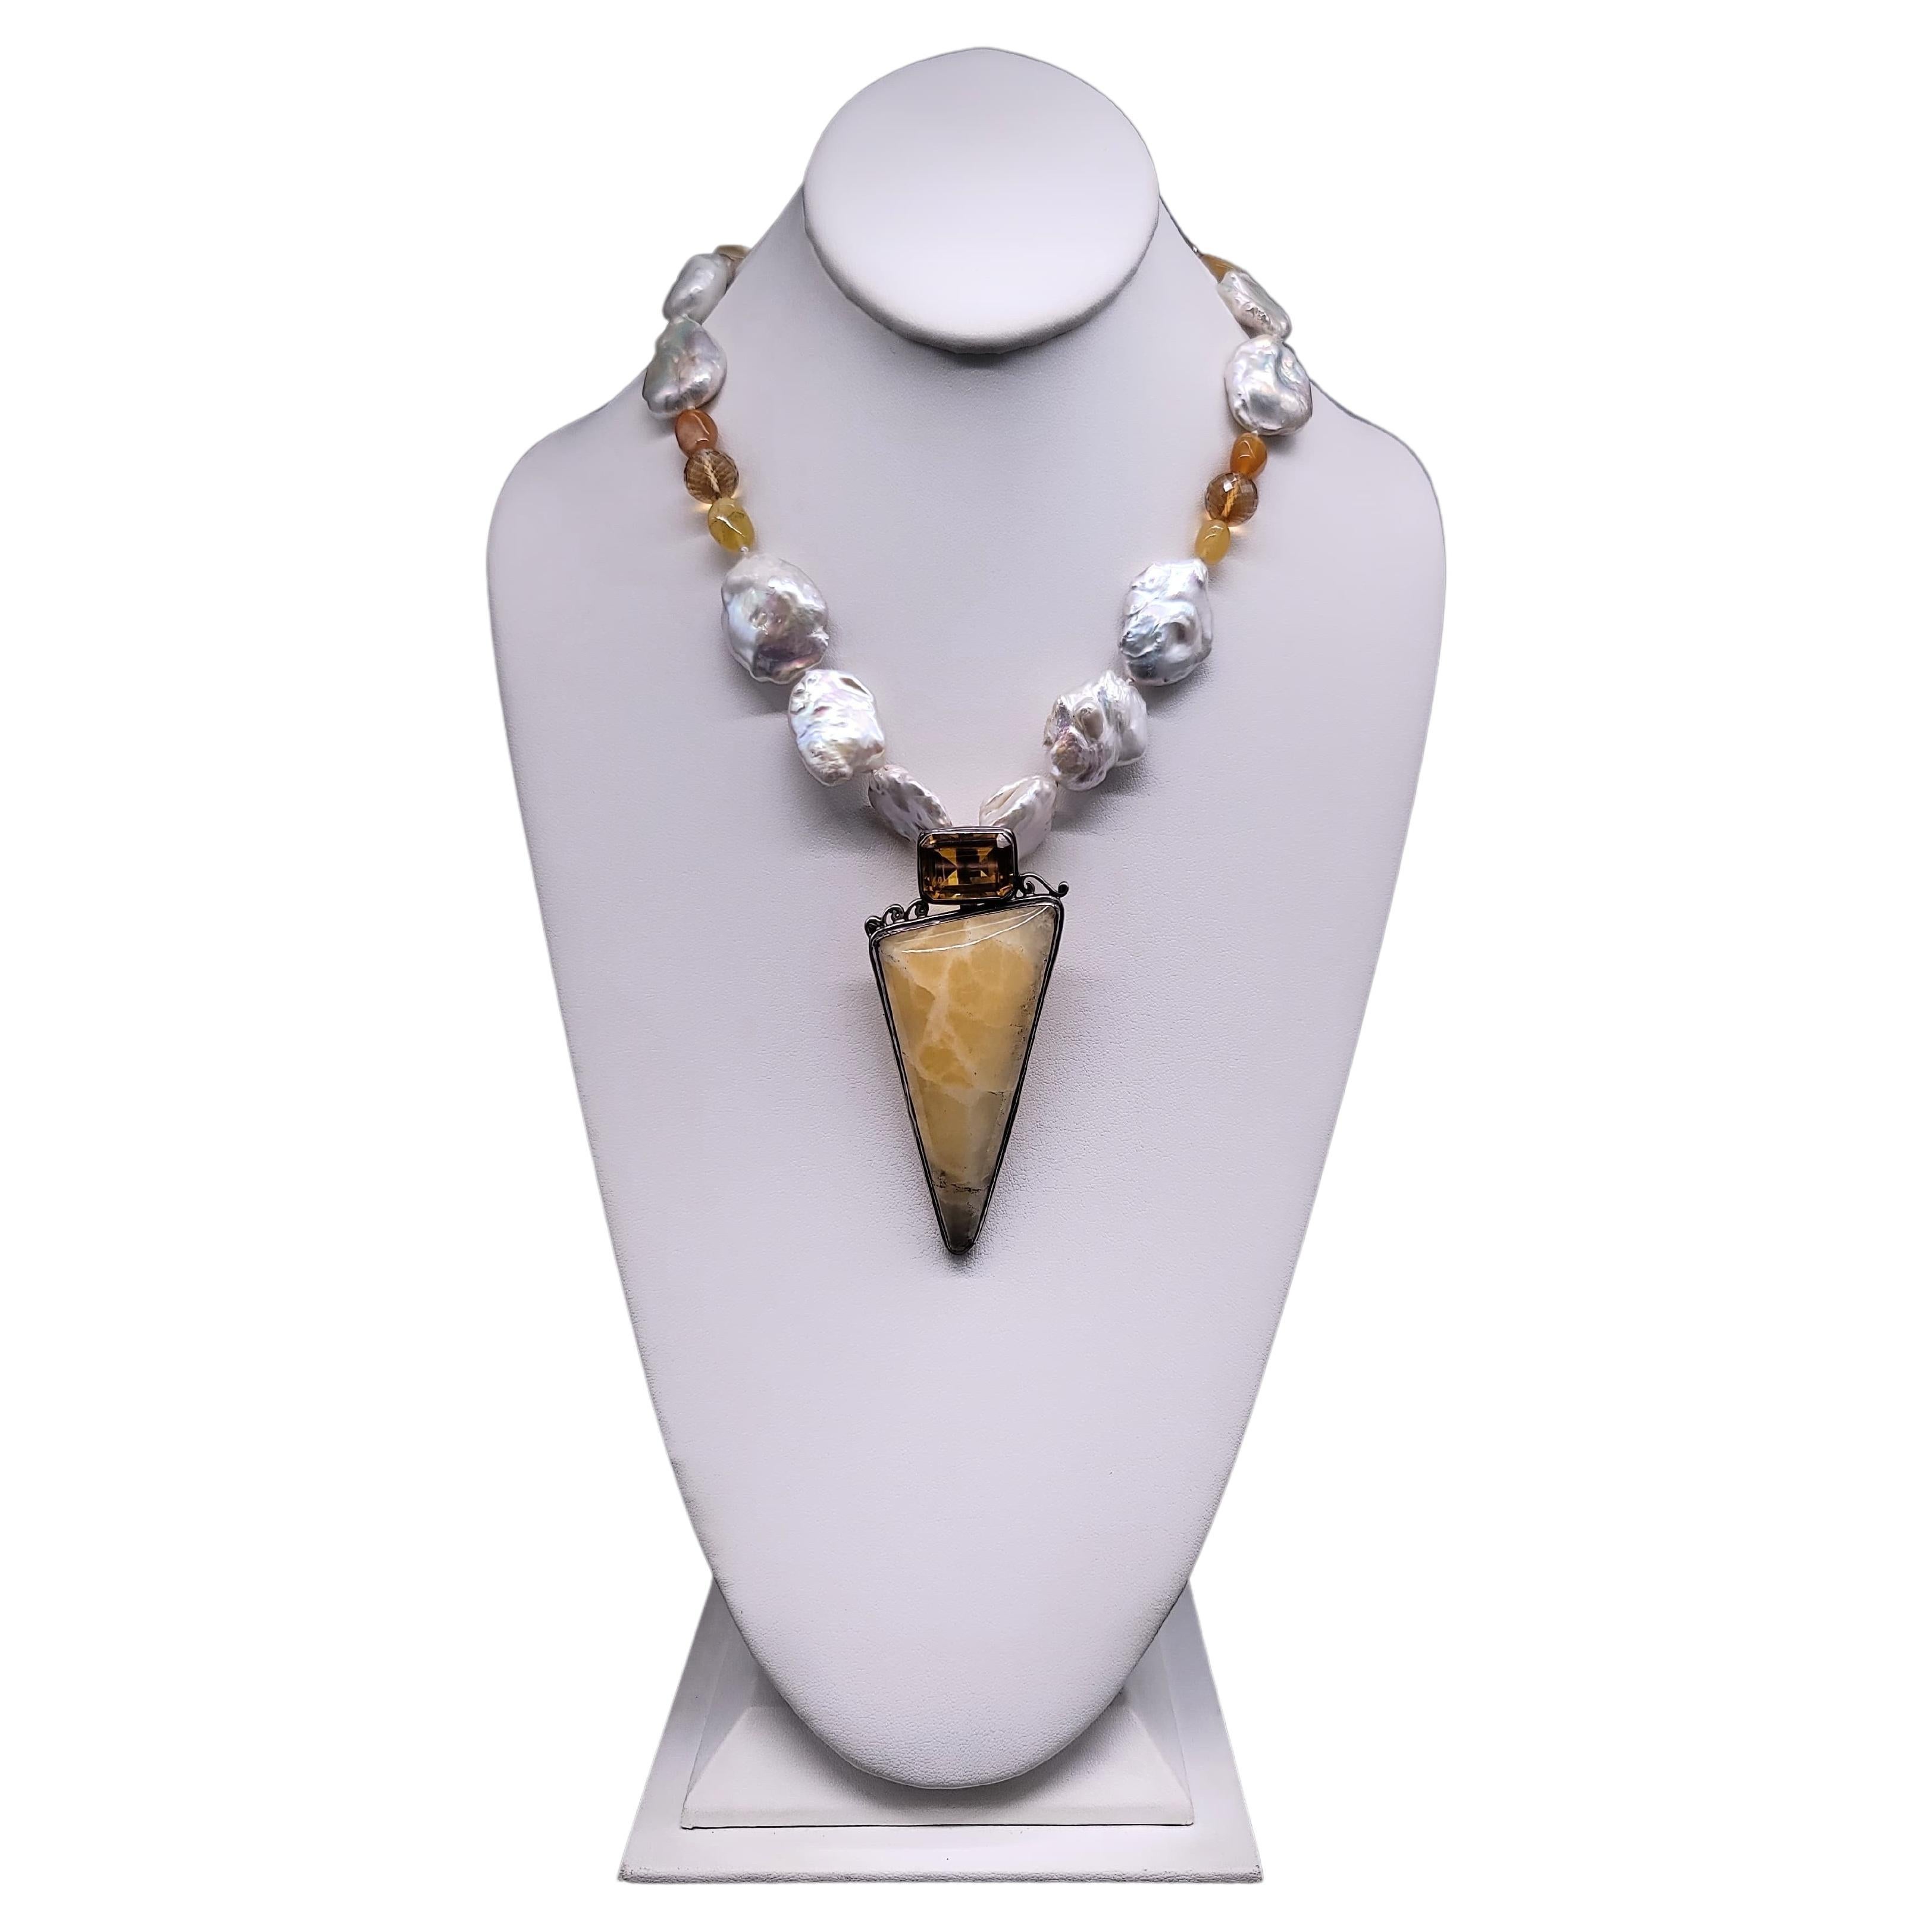 A.Jeschel  Baroque Pearls with Citrine and Onyx Pendant necklace. For Sale